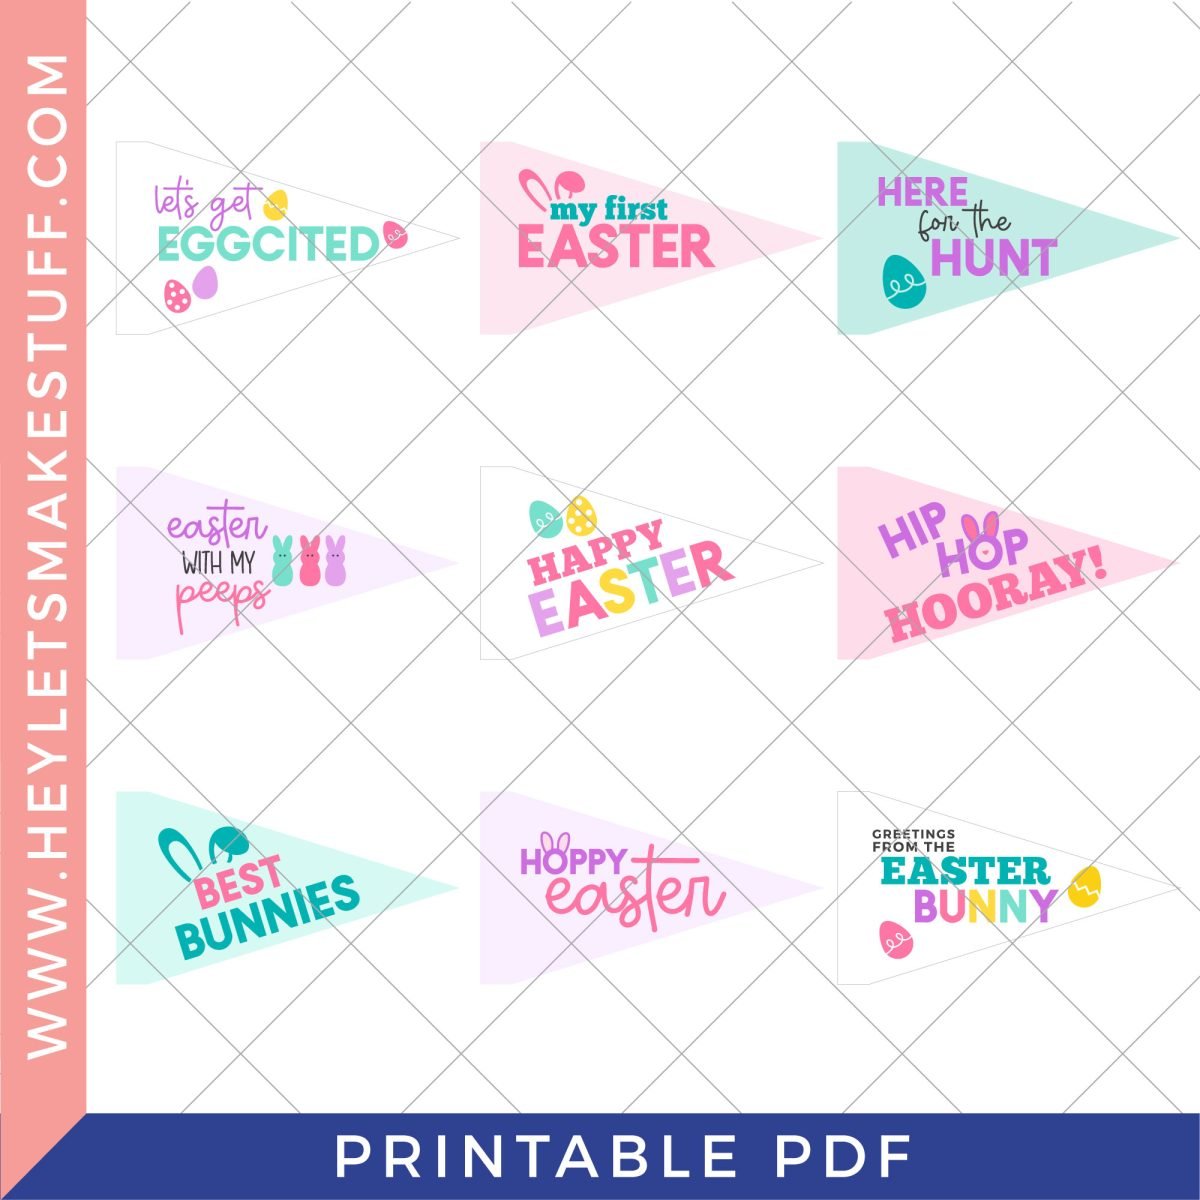 Printable Easter pennants - security image